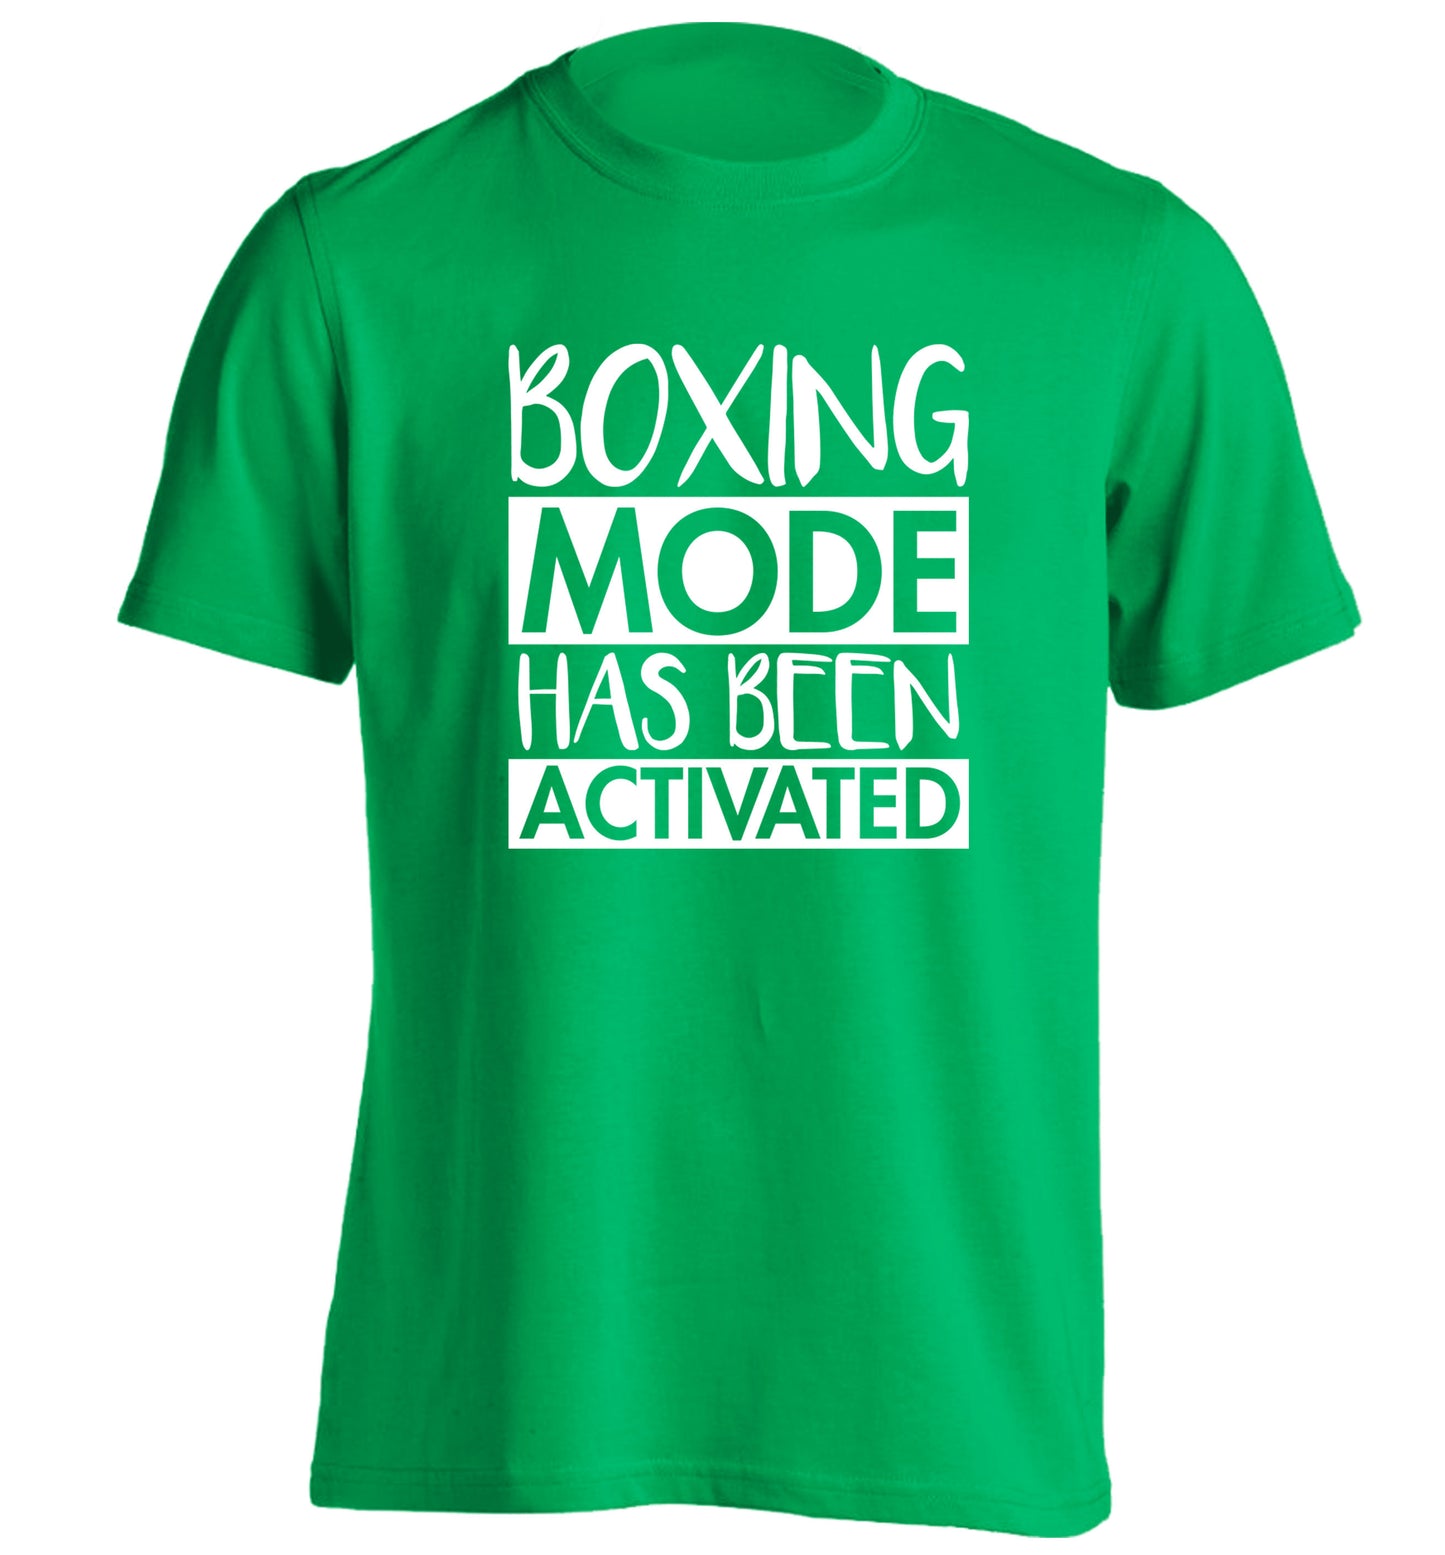 Boxing mode activated adults unisex green Tshirt 2XL